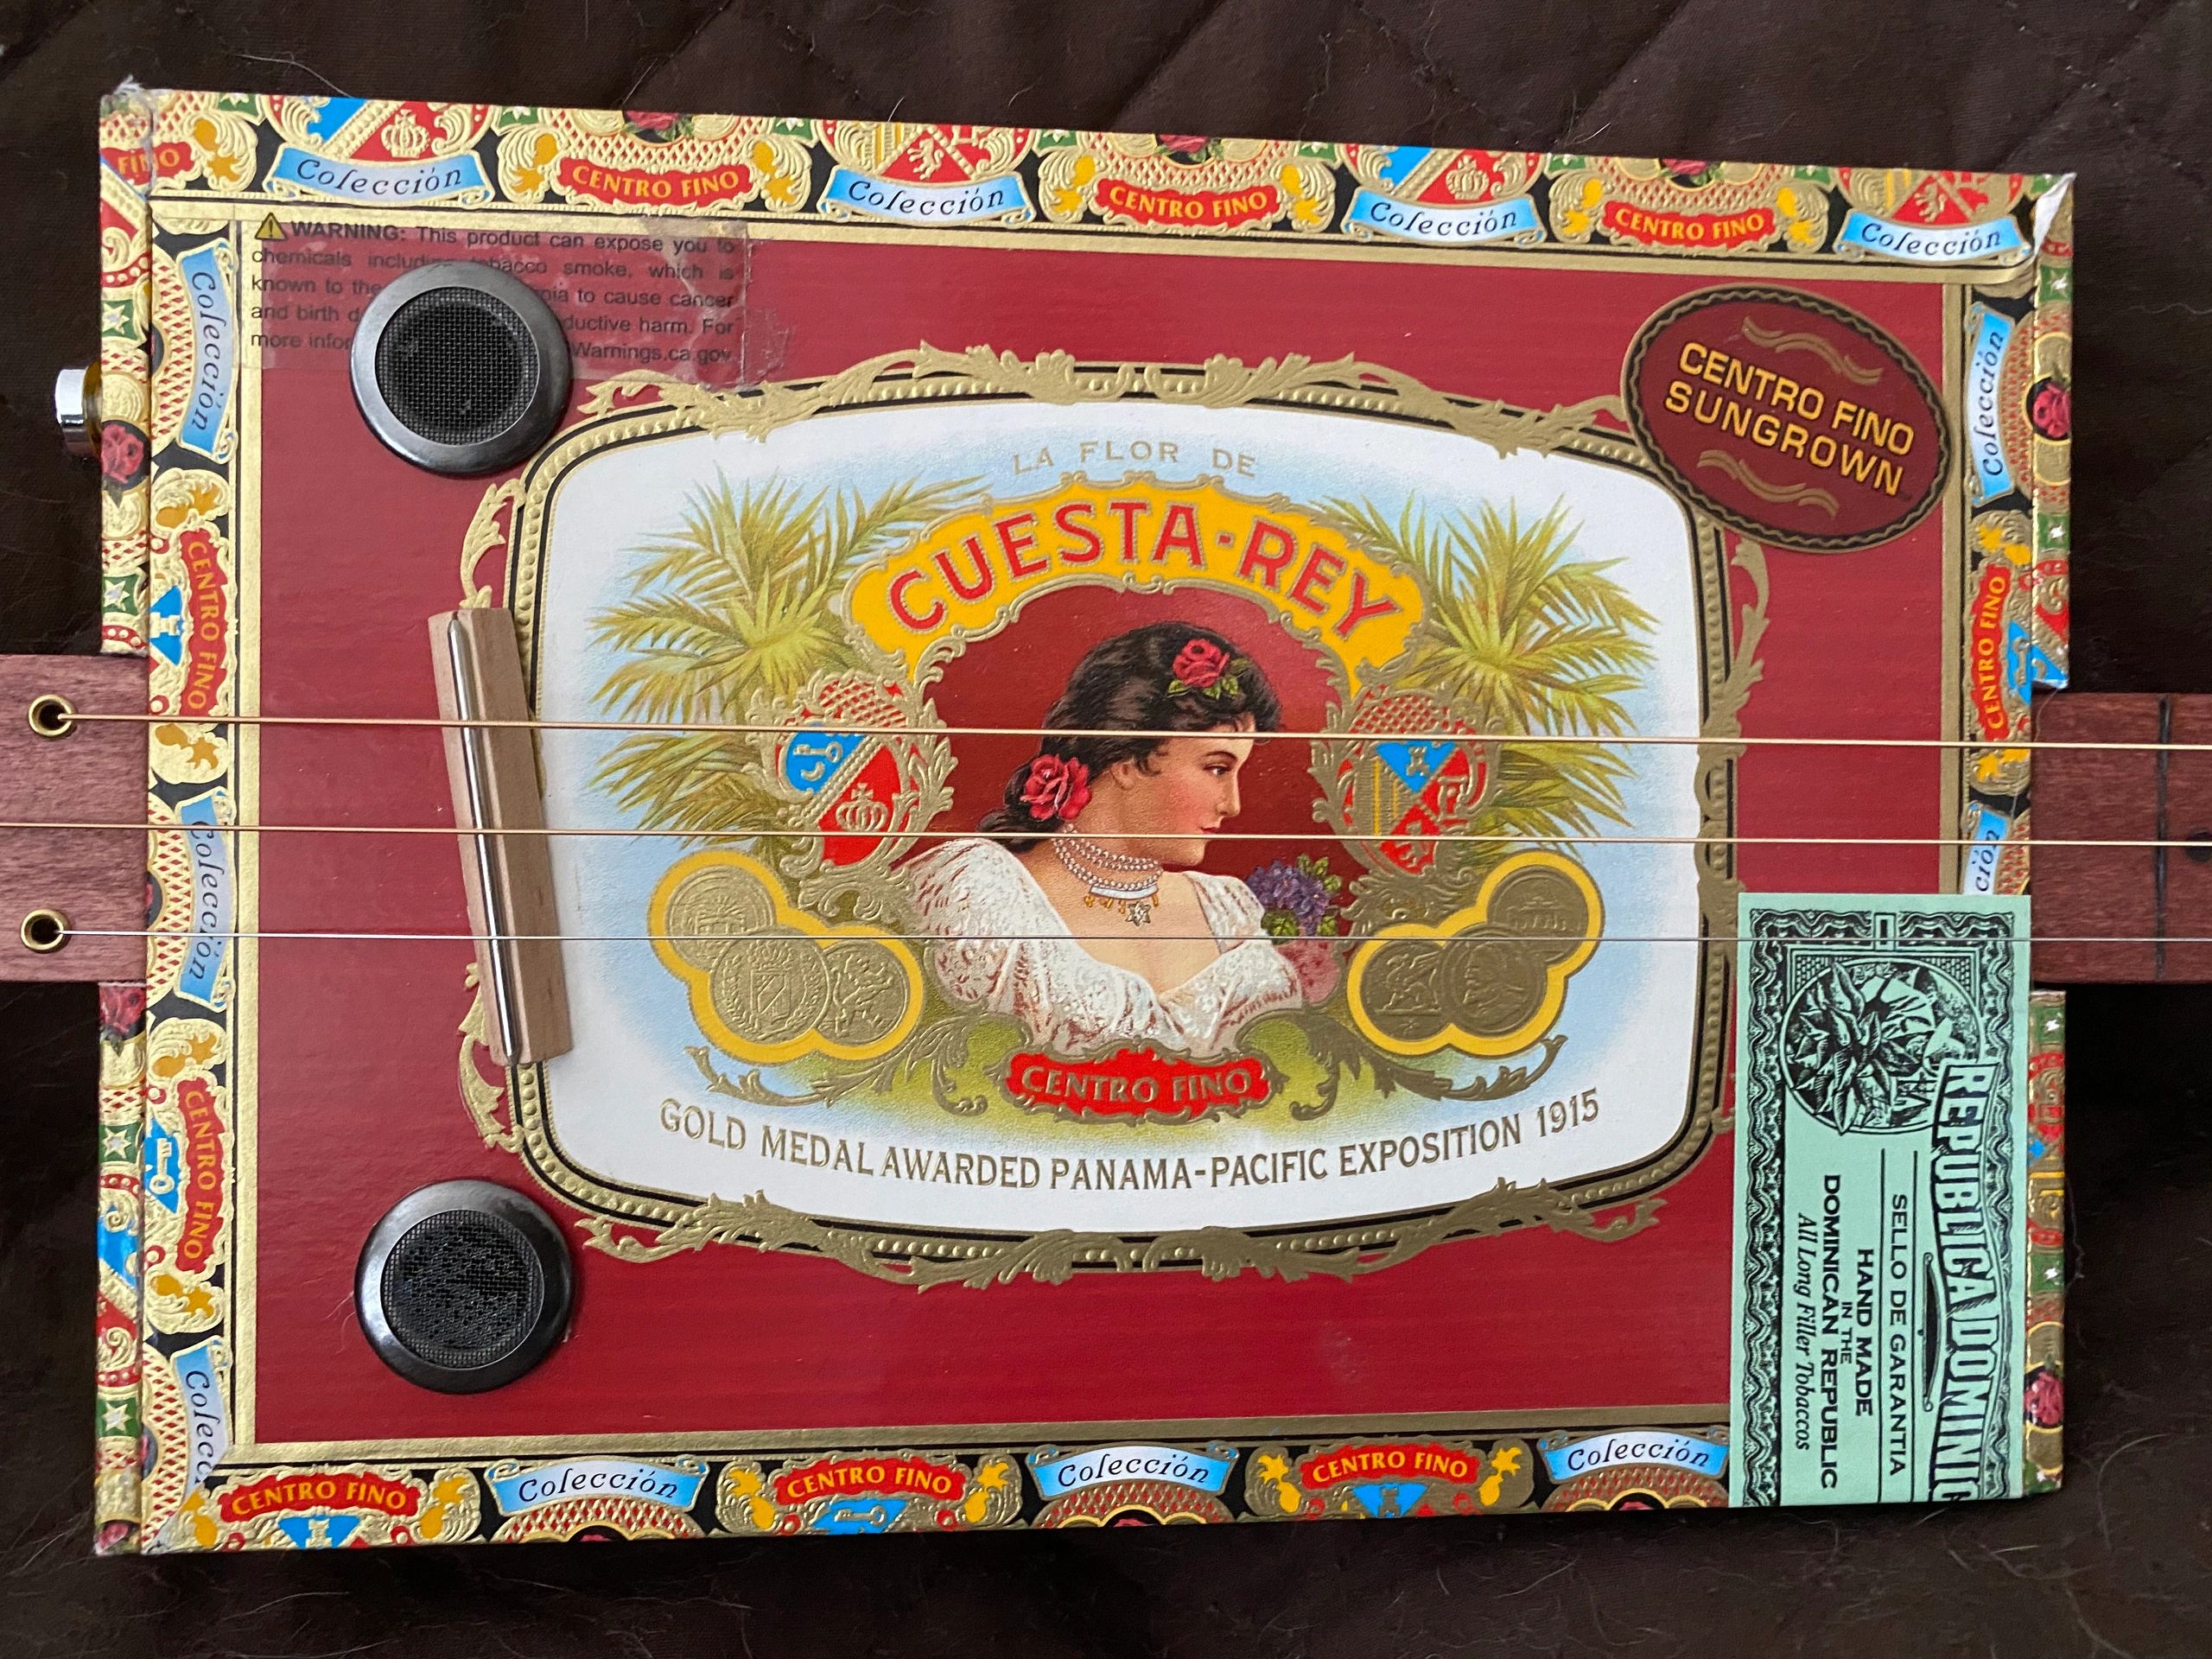 Actual 3-String Fretless Cigar Box Guitar that is featured in this program.